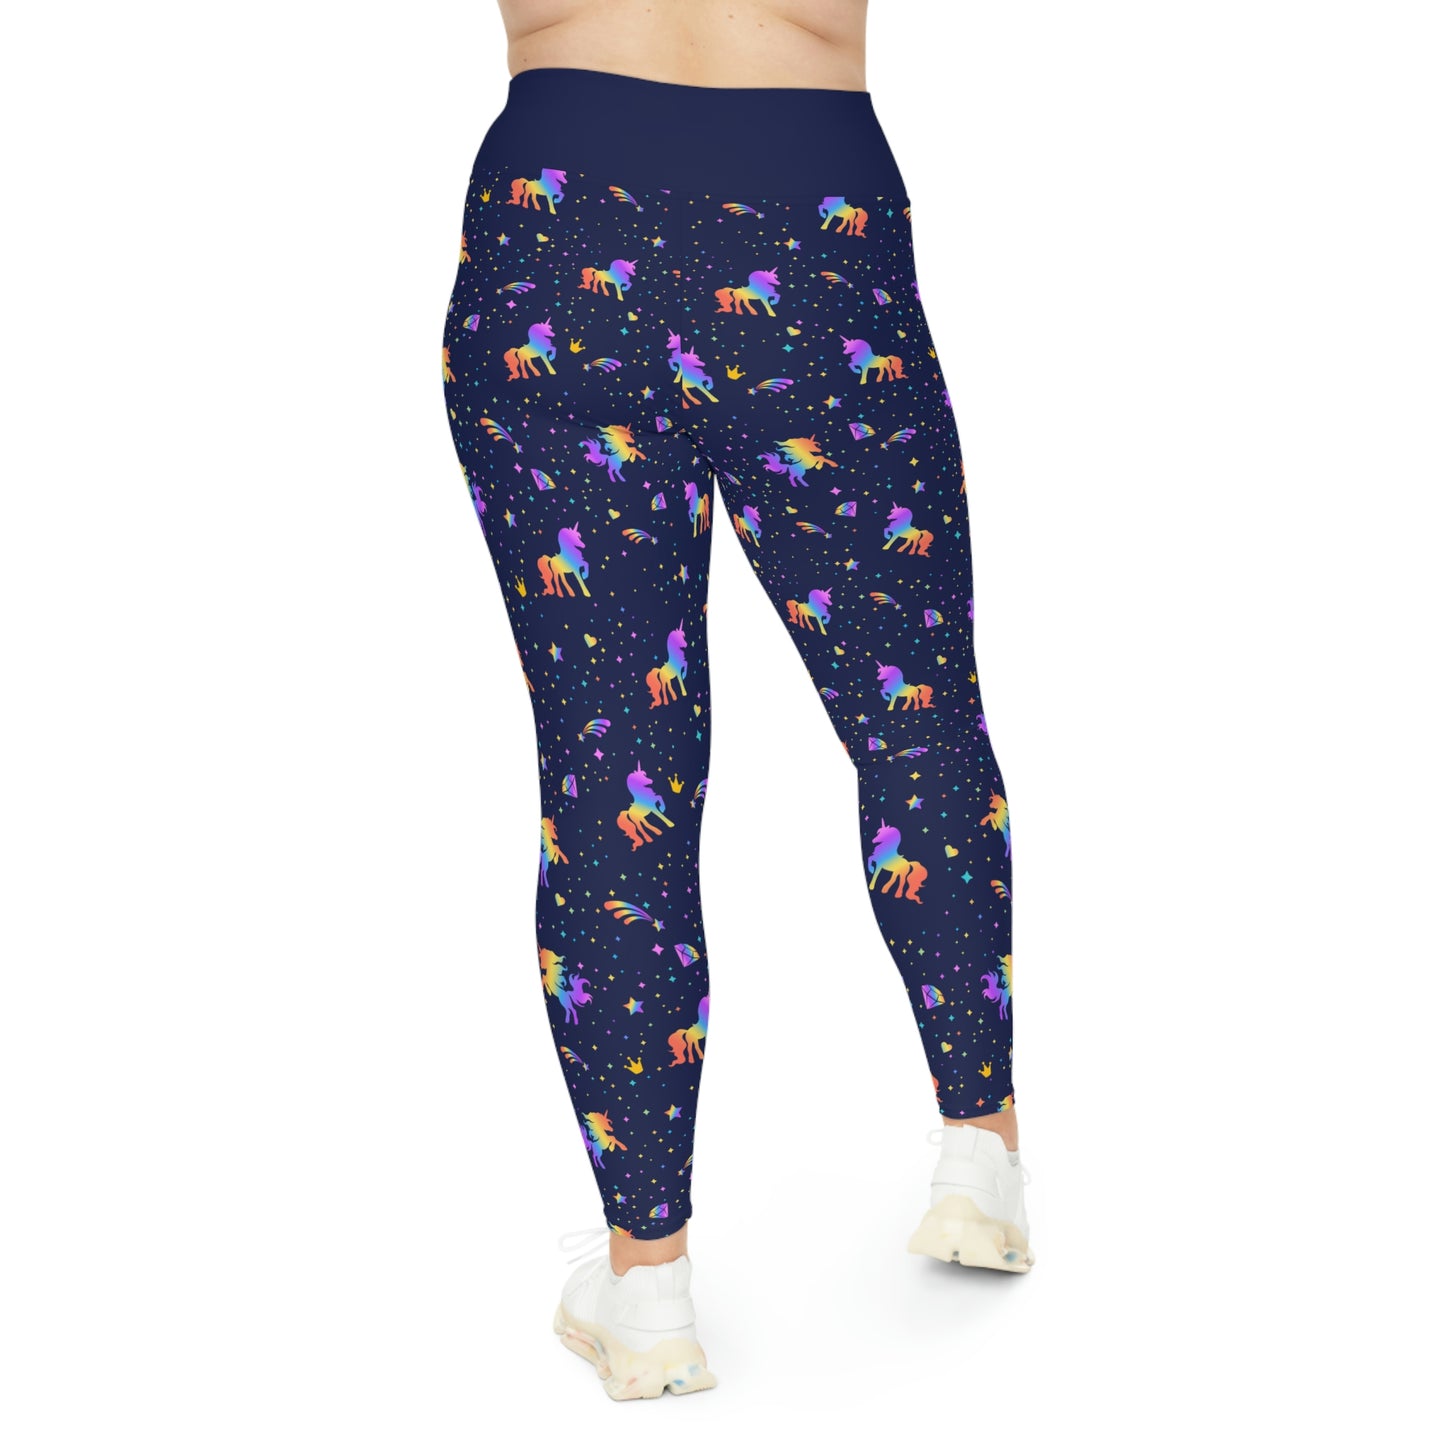 Unicorn Plus Size Leggings One of a Kind Gift - Unique Workout Activewear tights for Mom fitness, Mothers Day, Girlfriend Christmas Gift